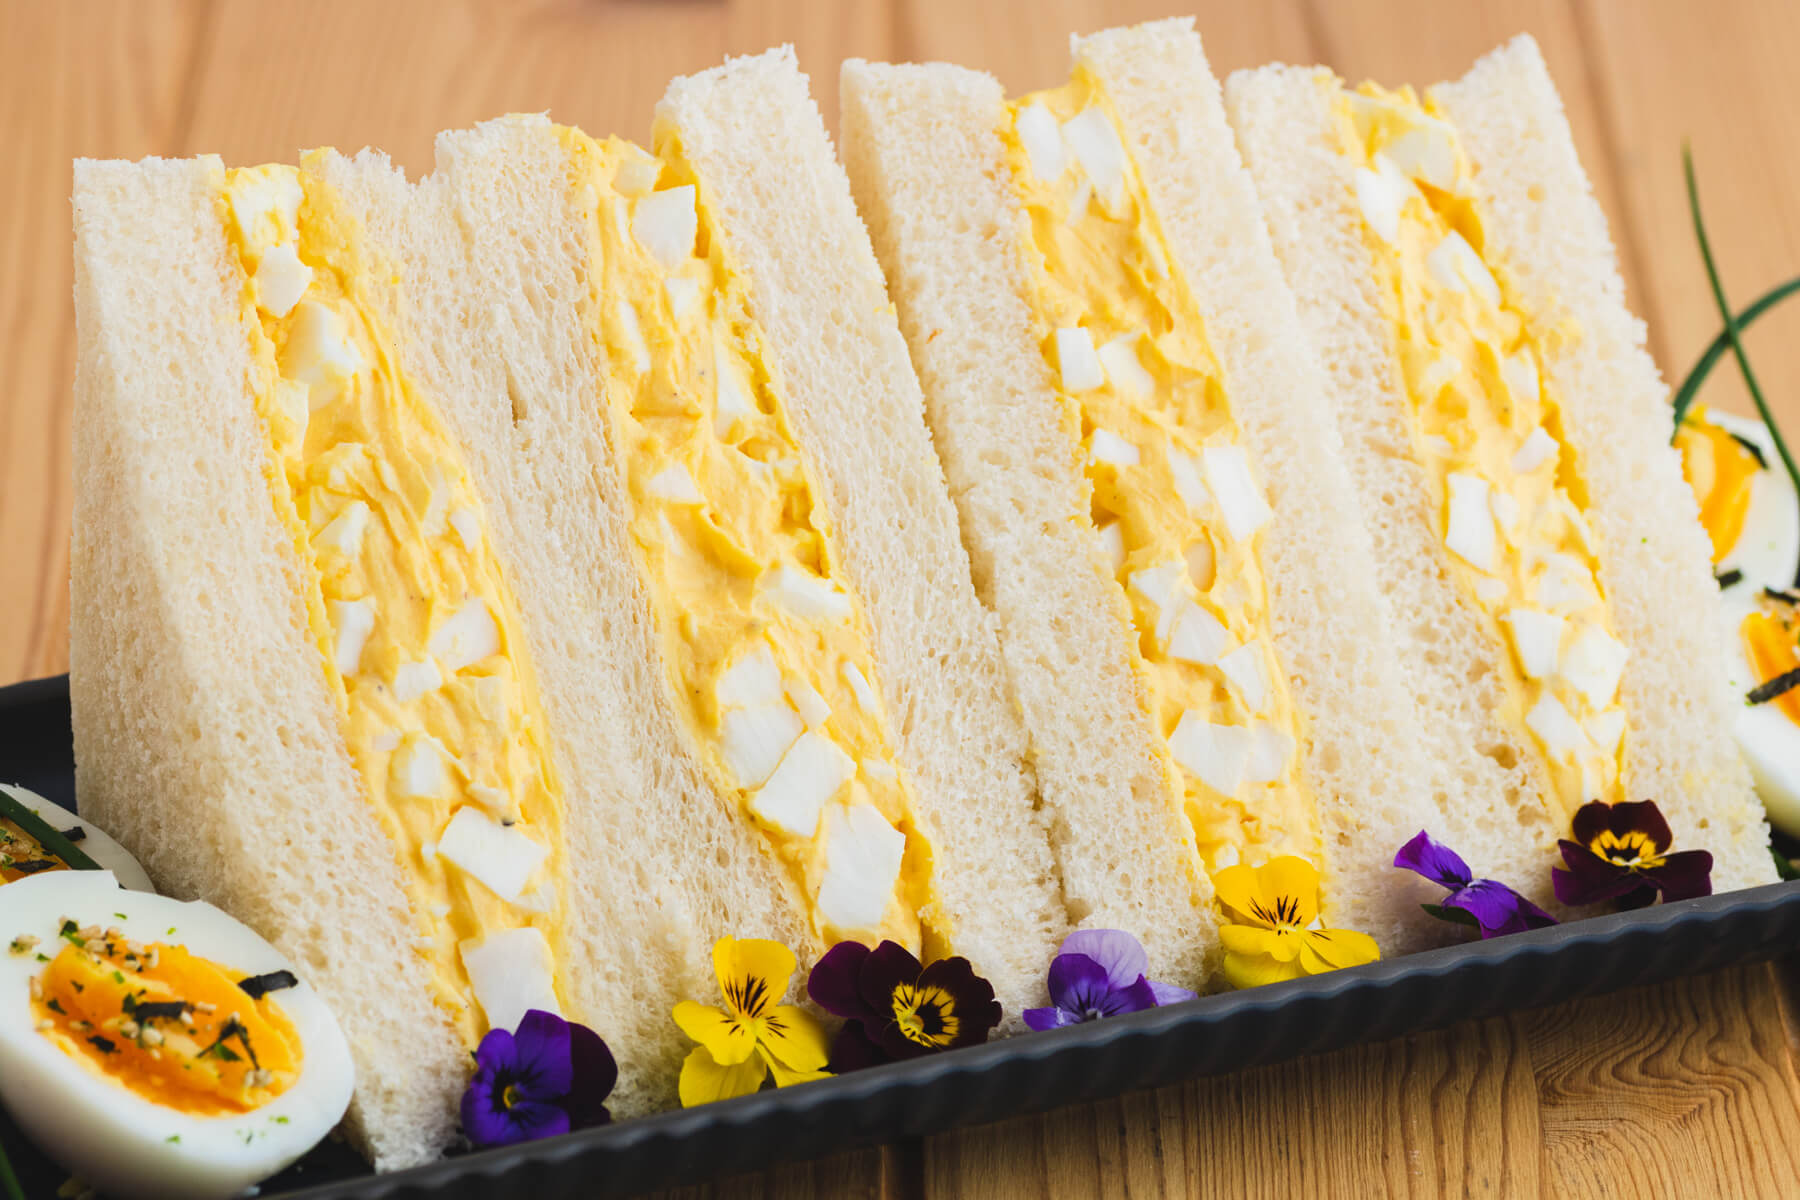 Four rich yellow egg salad sandwiches on fluffy white crust less bread on a plate garnished with a hard boiled egg and edible flowers.